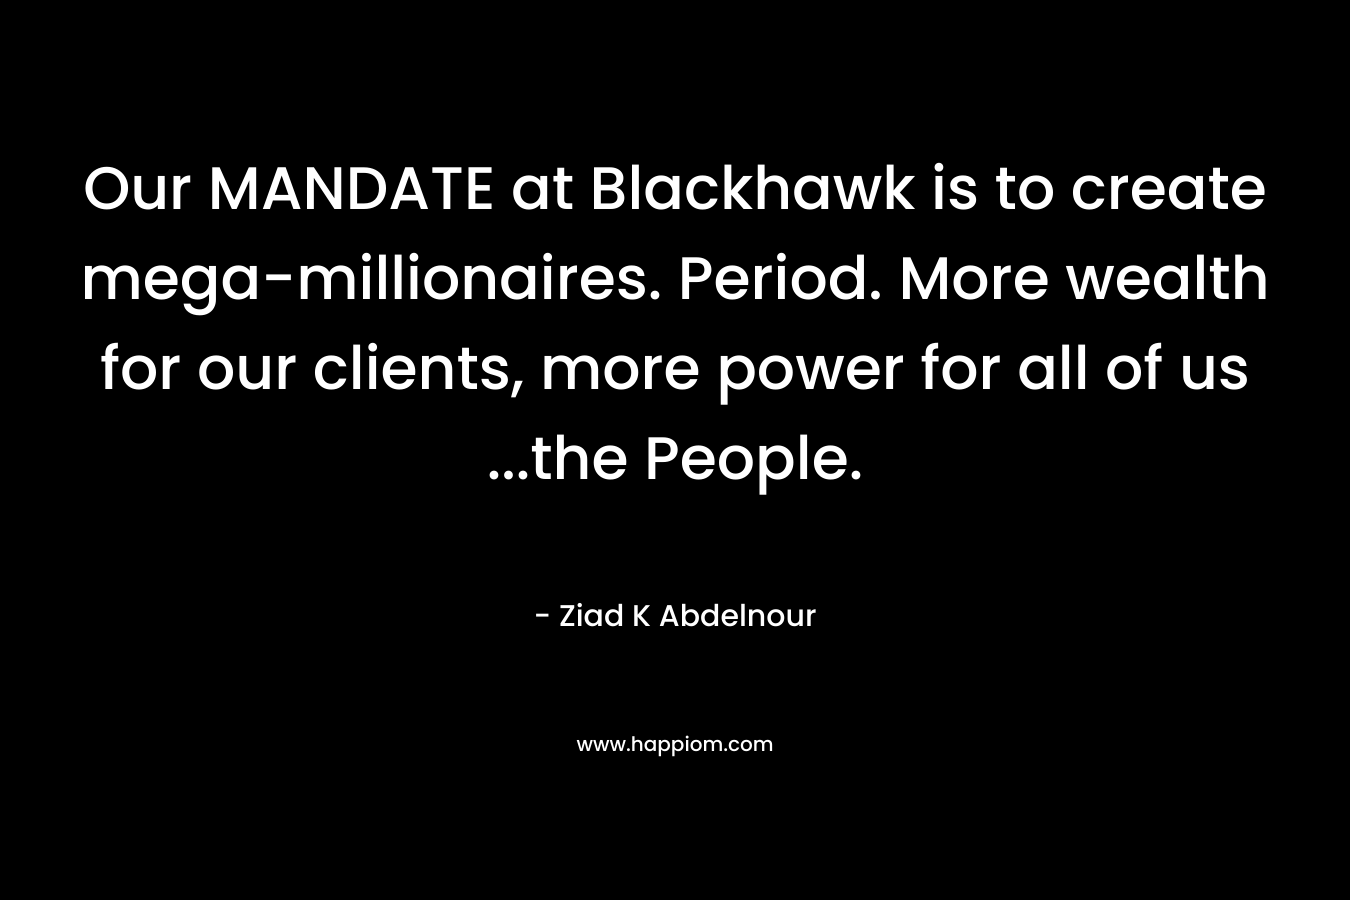 Our MANDATE at Blackhawk is to create mega-millionaires. Period. More wealth for our clients, more power for all of us ...the People.